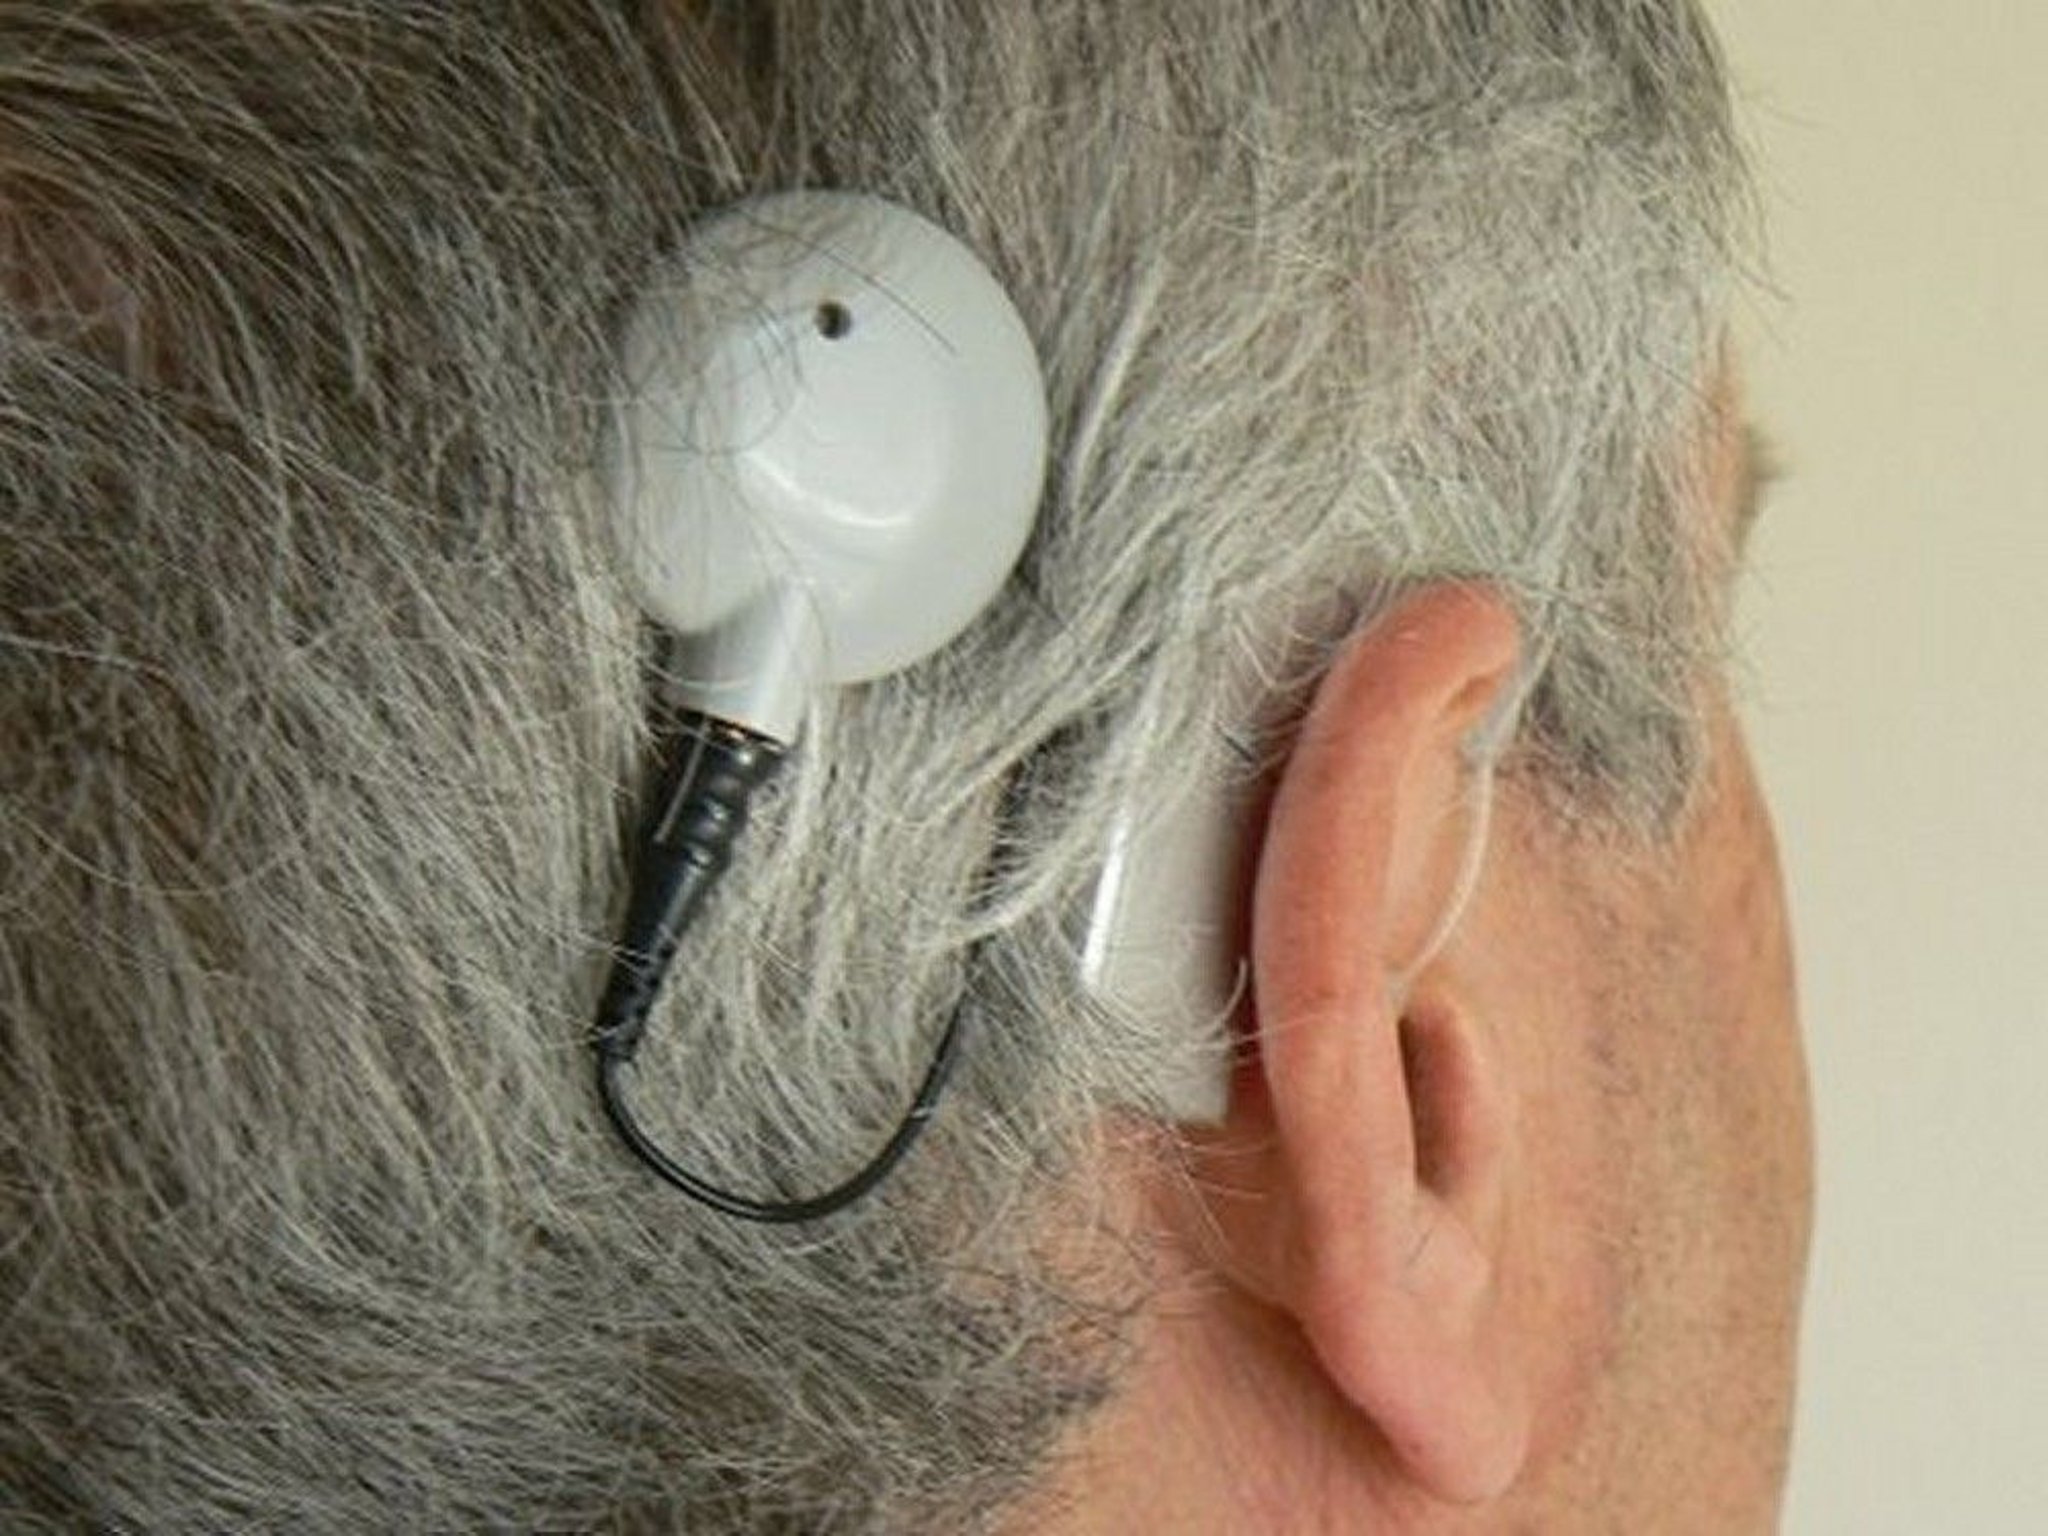 Person with Cochlear Implant